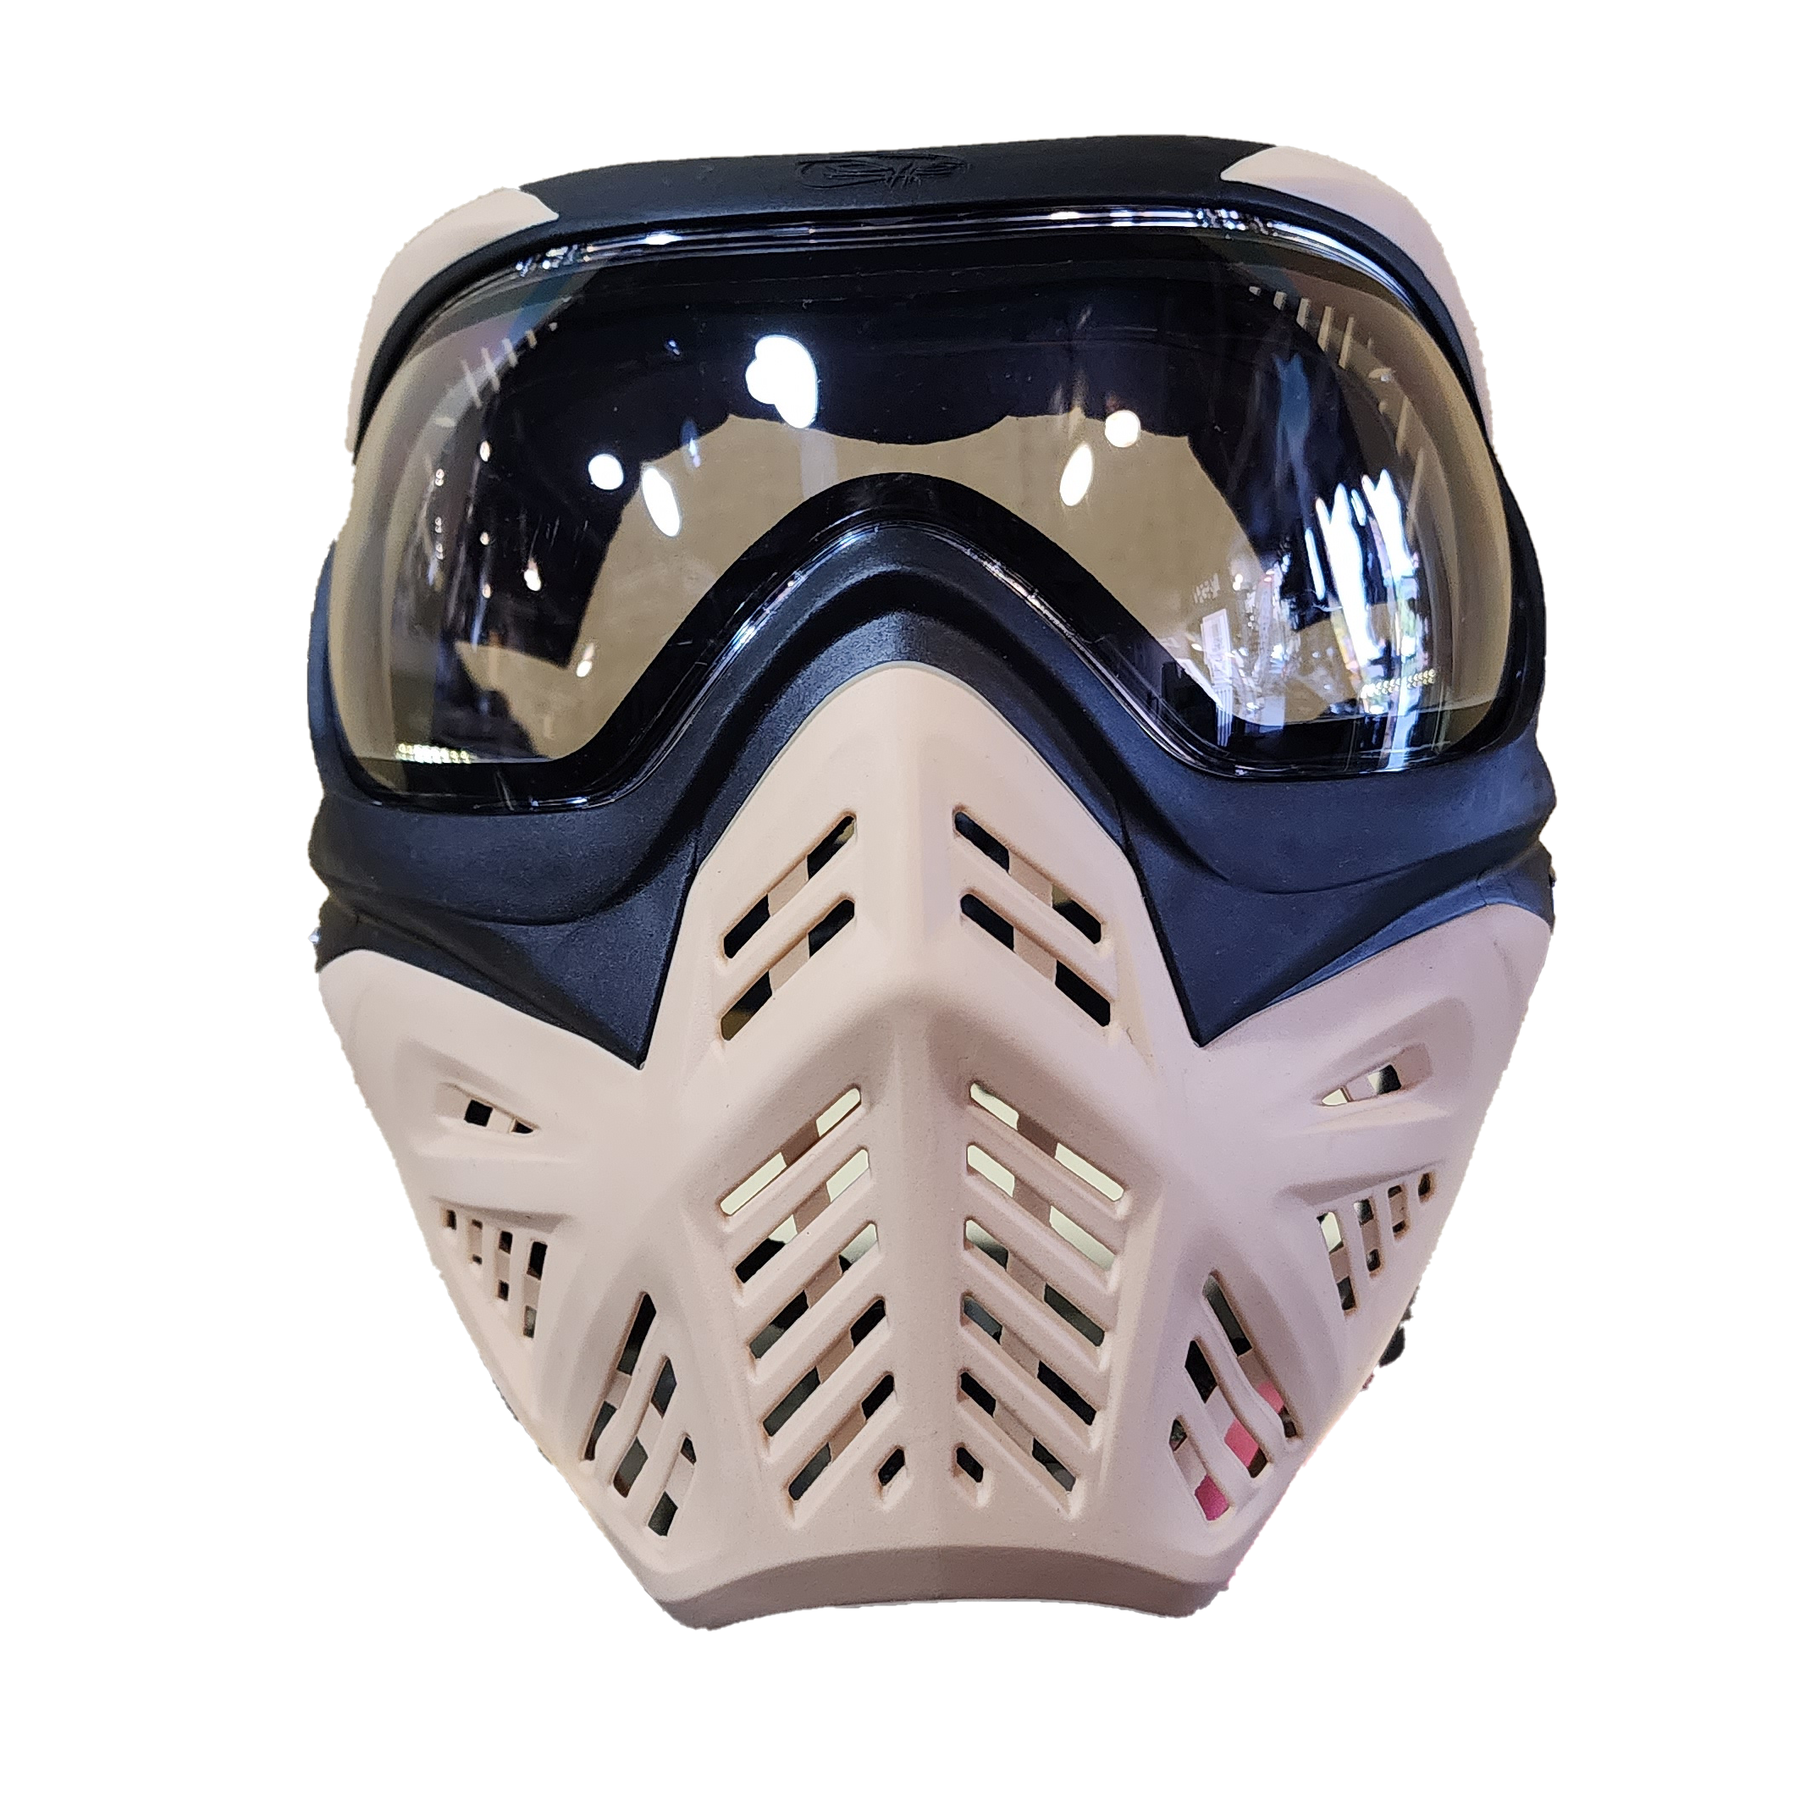 VForce Grill 2.0 Crocodile Paintball Mask